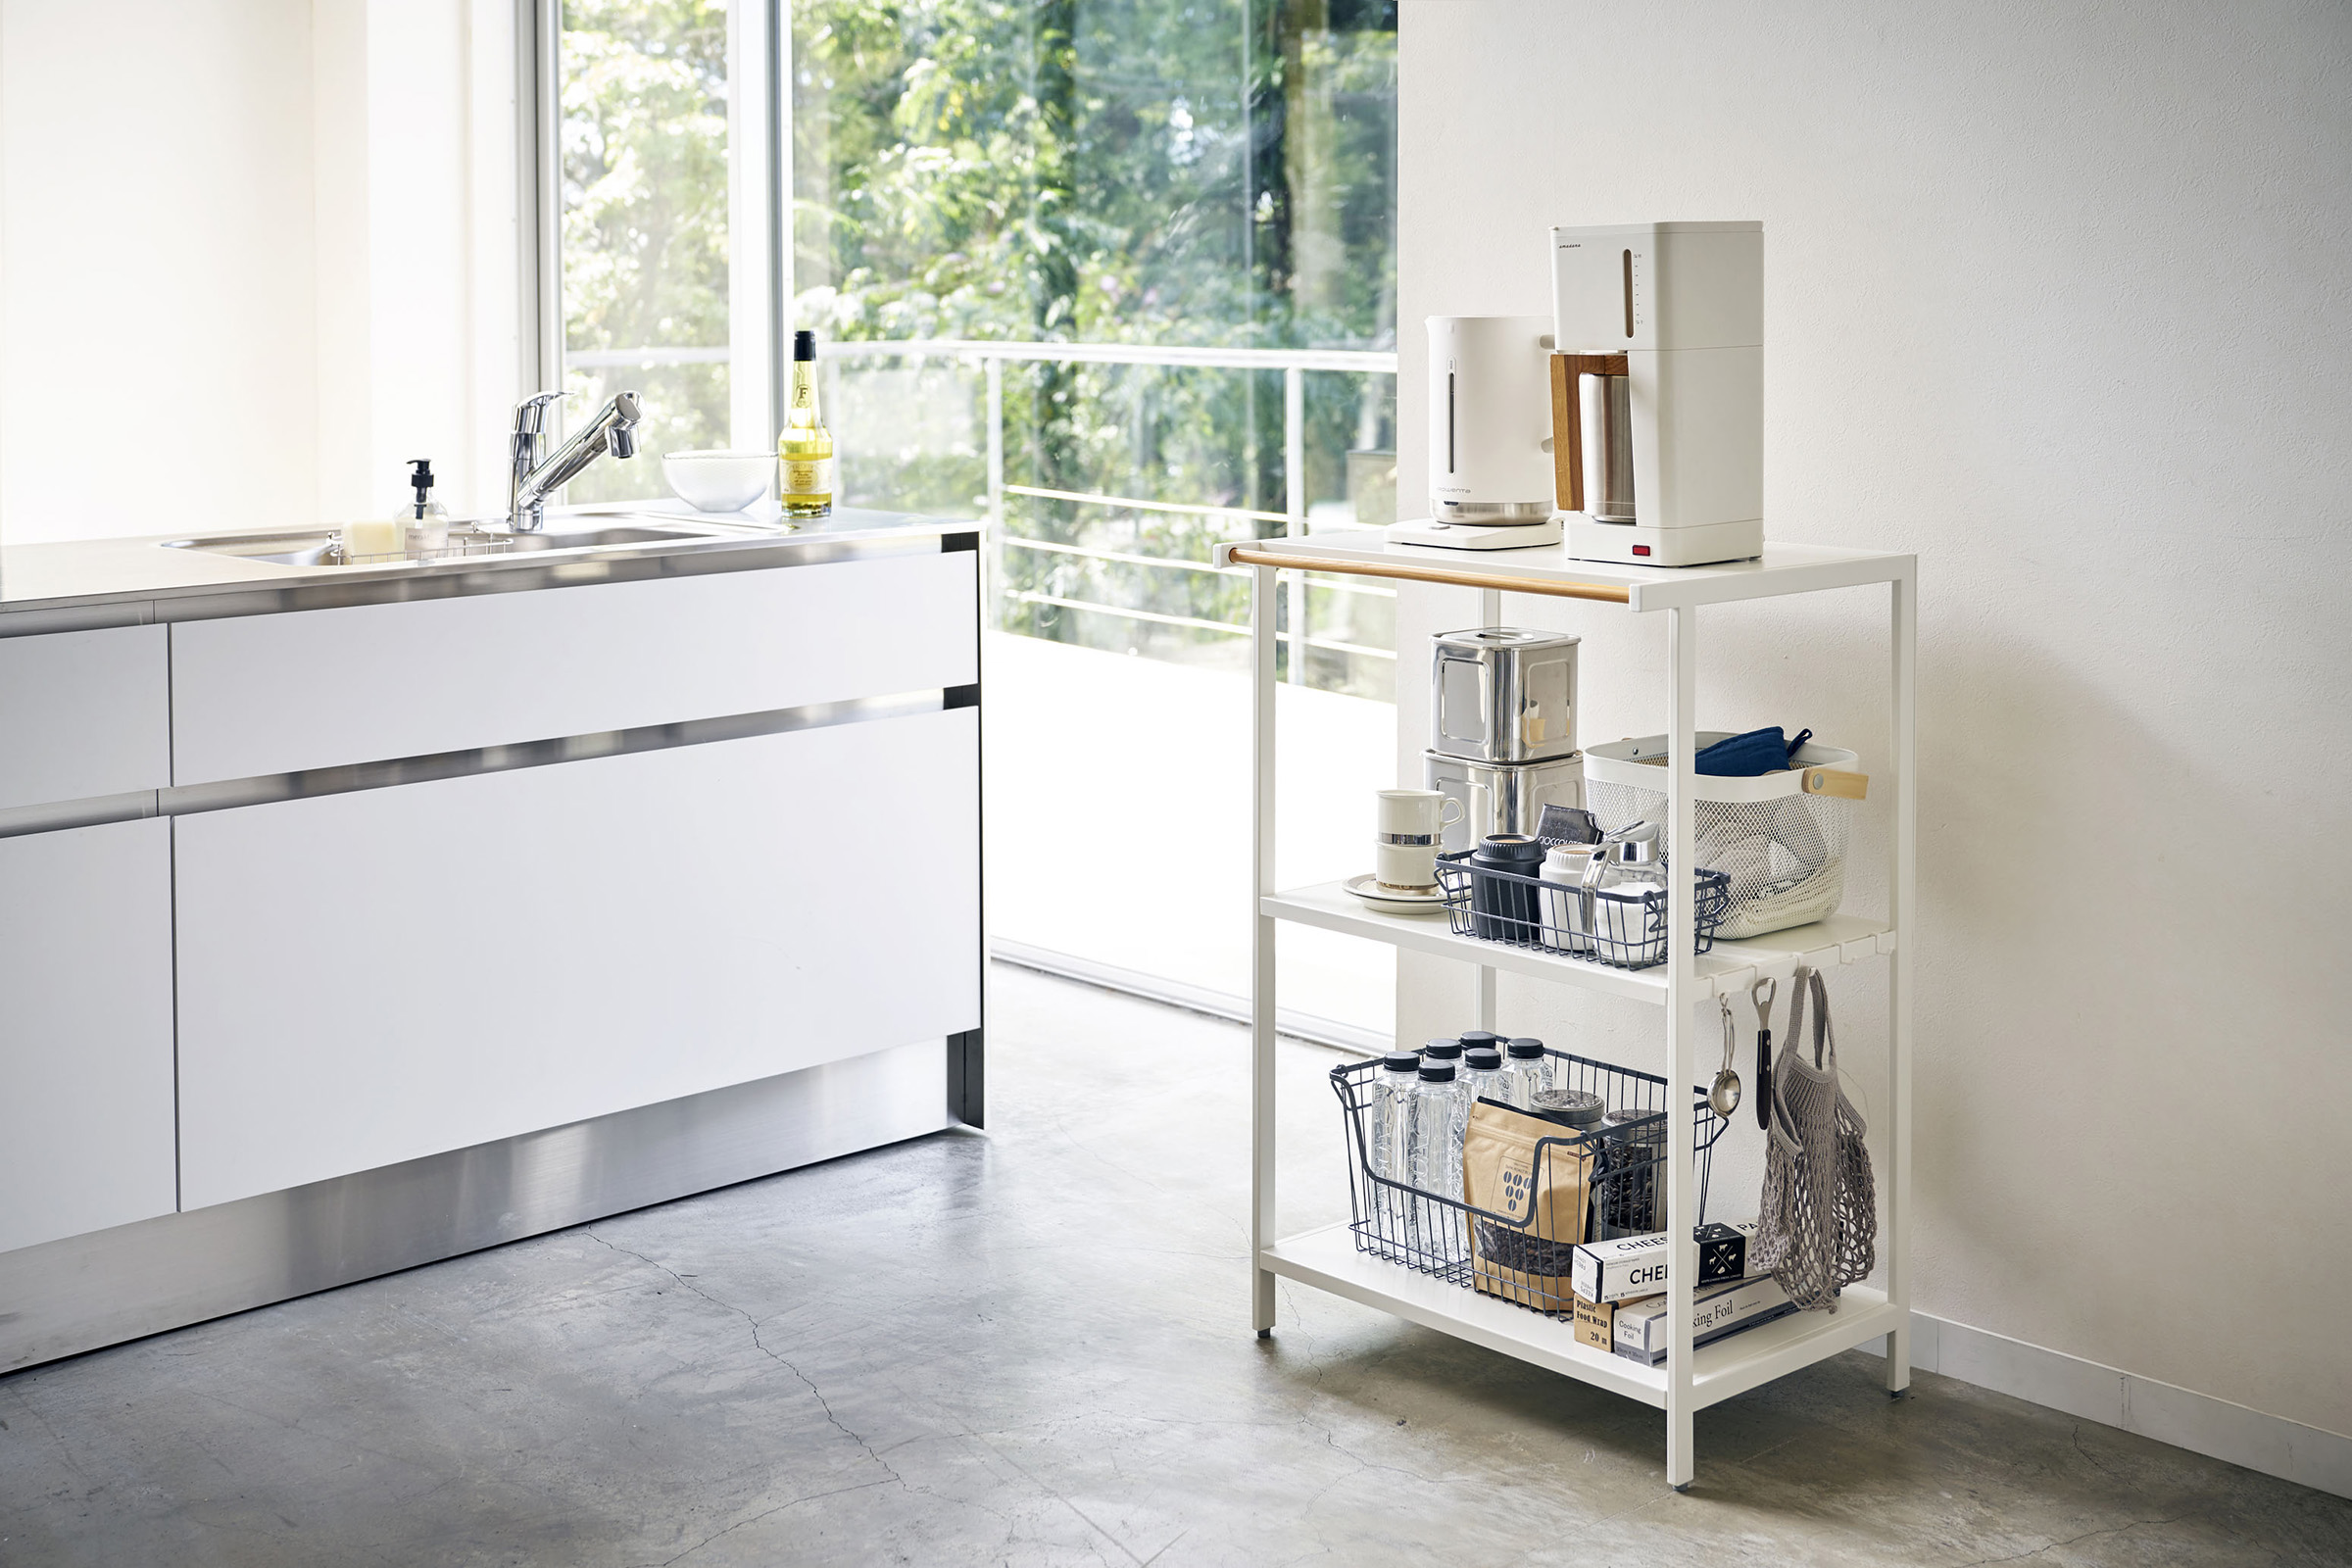 White Storage Rack holding coffee items and appliances in kitchen by Yamazaki Home.